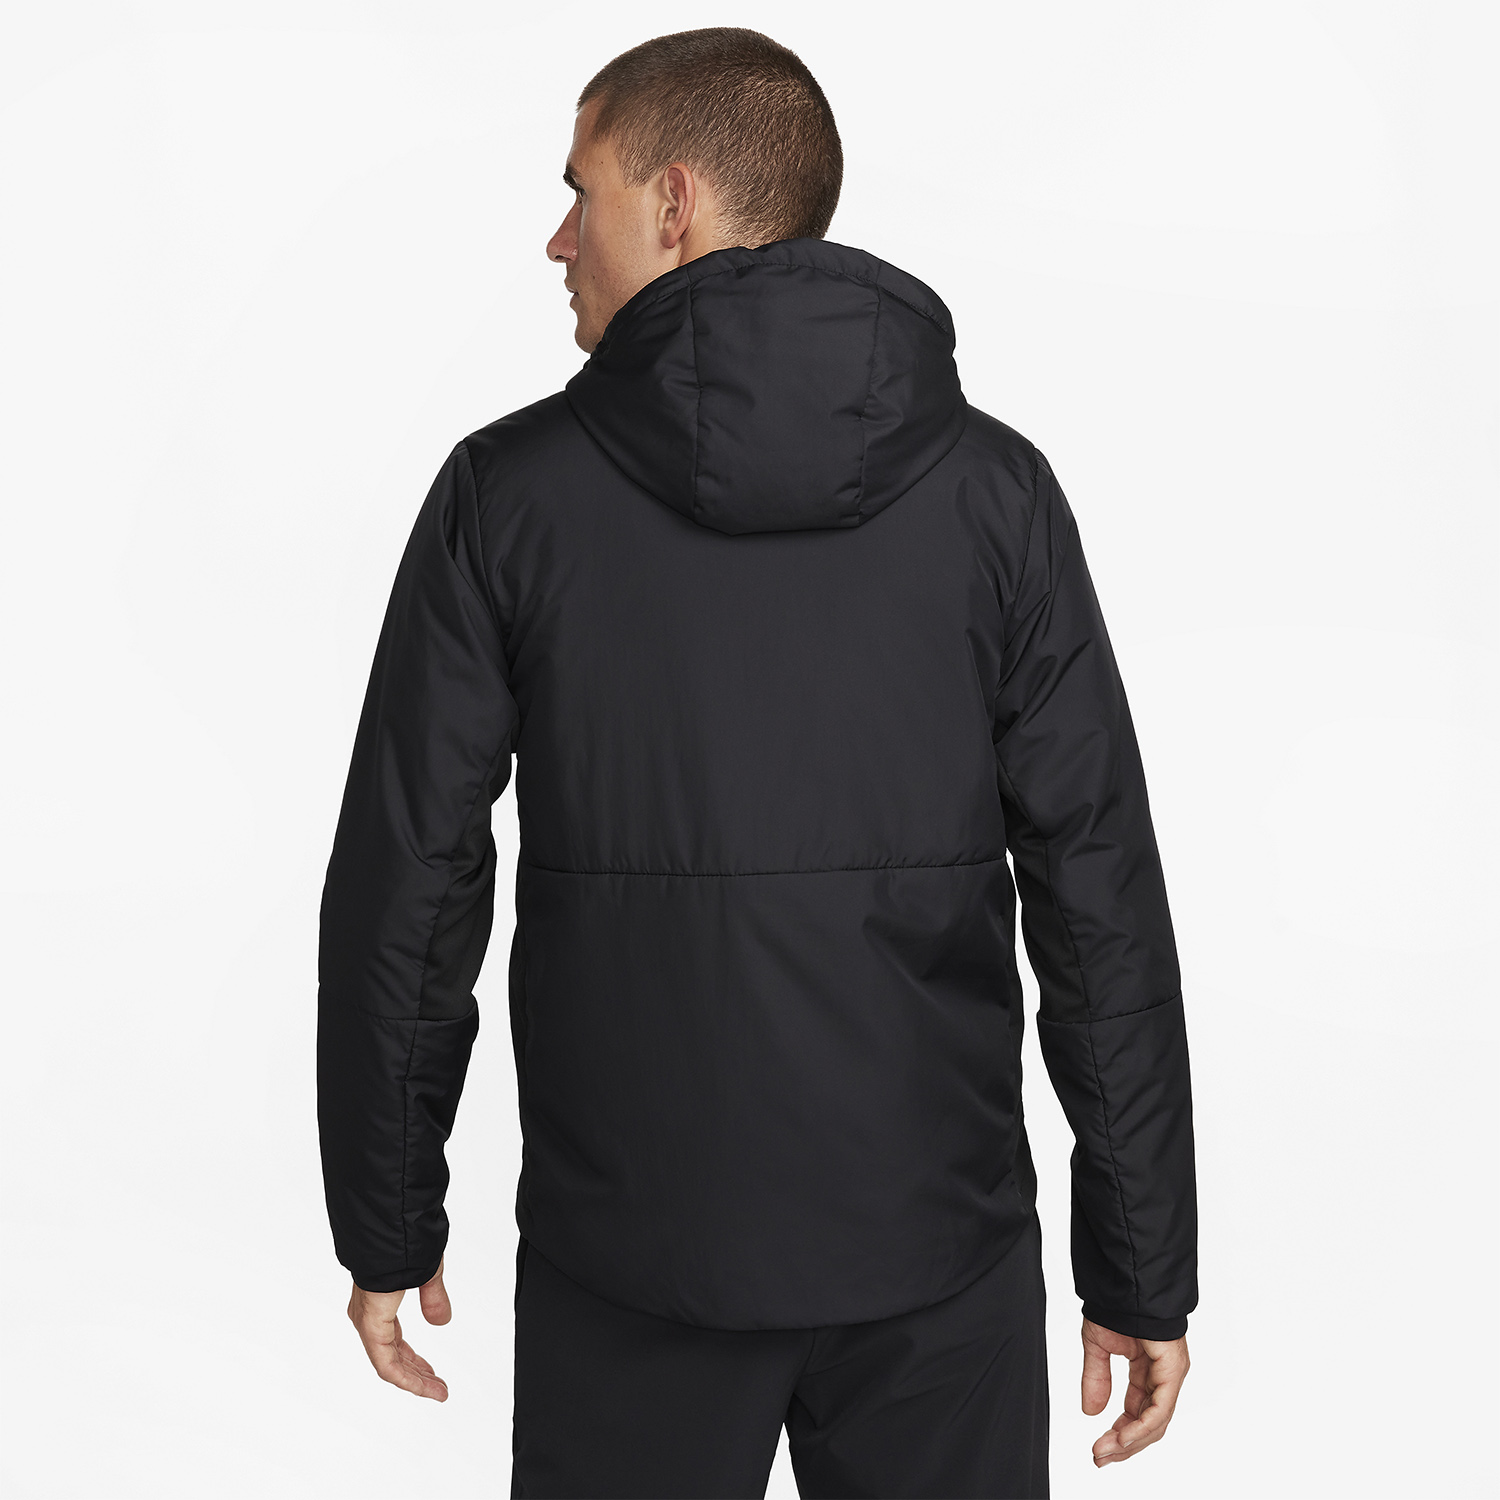 Nike Unlimited Therma-FIT Men's Training Jacket - Black